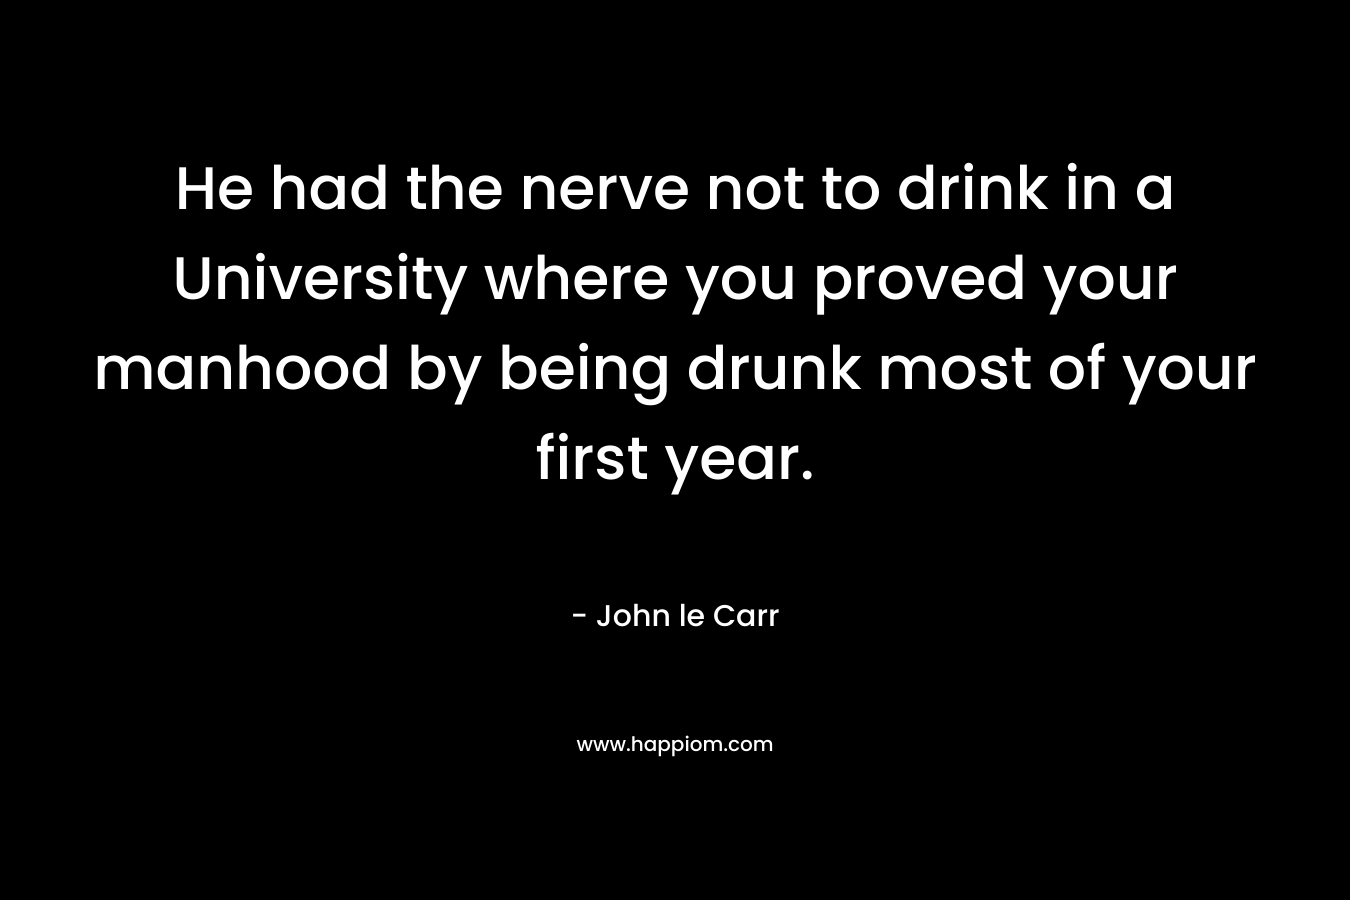 He had the nerve not to drink in a University where you proved your manhood by being drunk most of your first year.